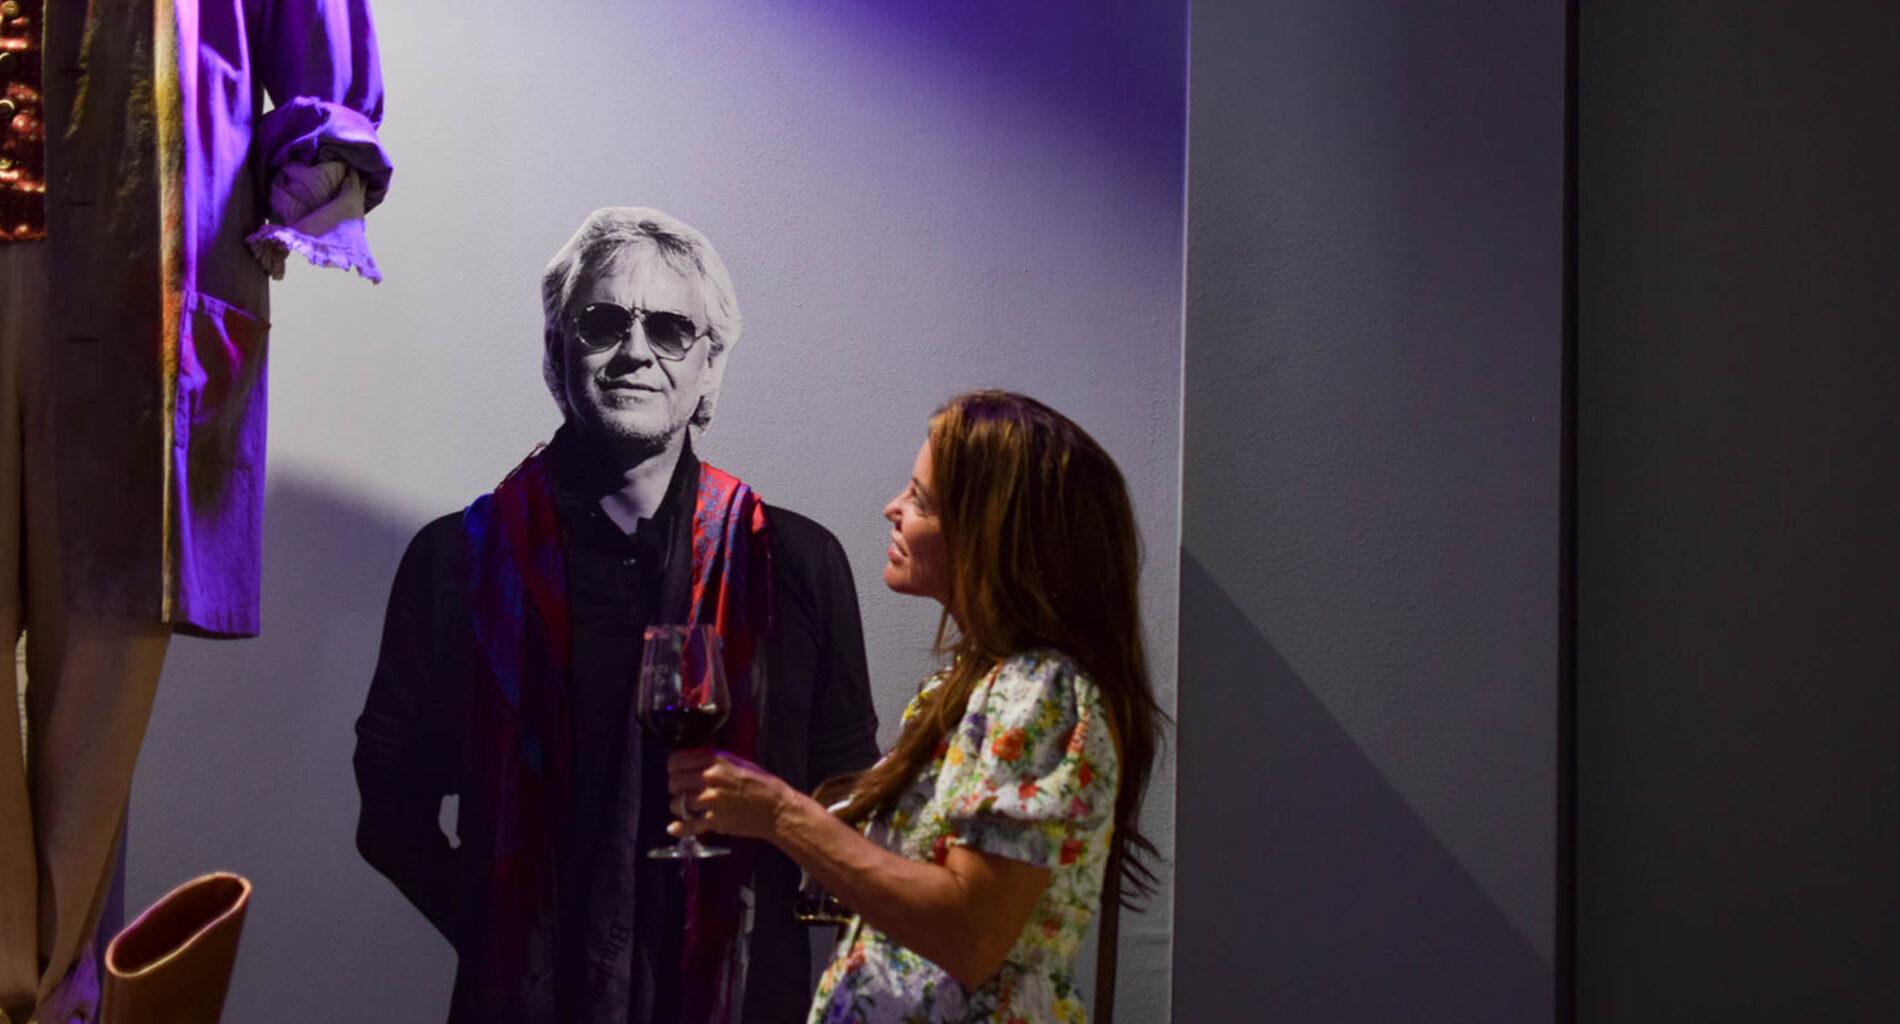 The Bocelli Museum is a magical place for the fans of the great tenor.